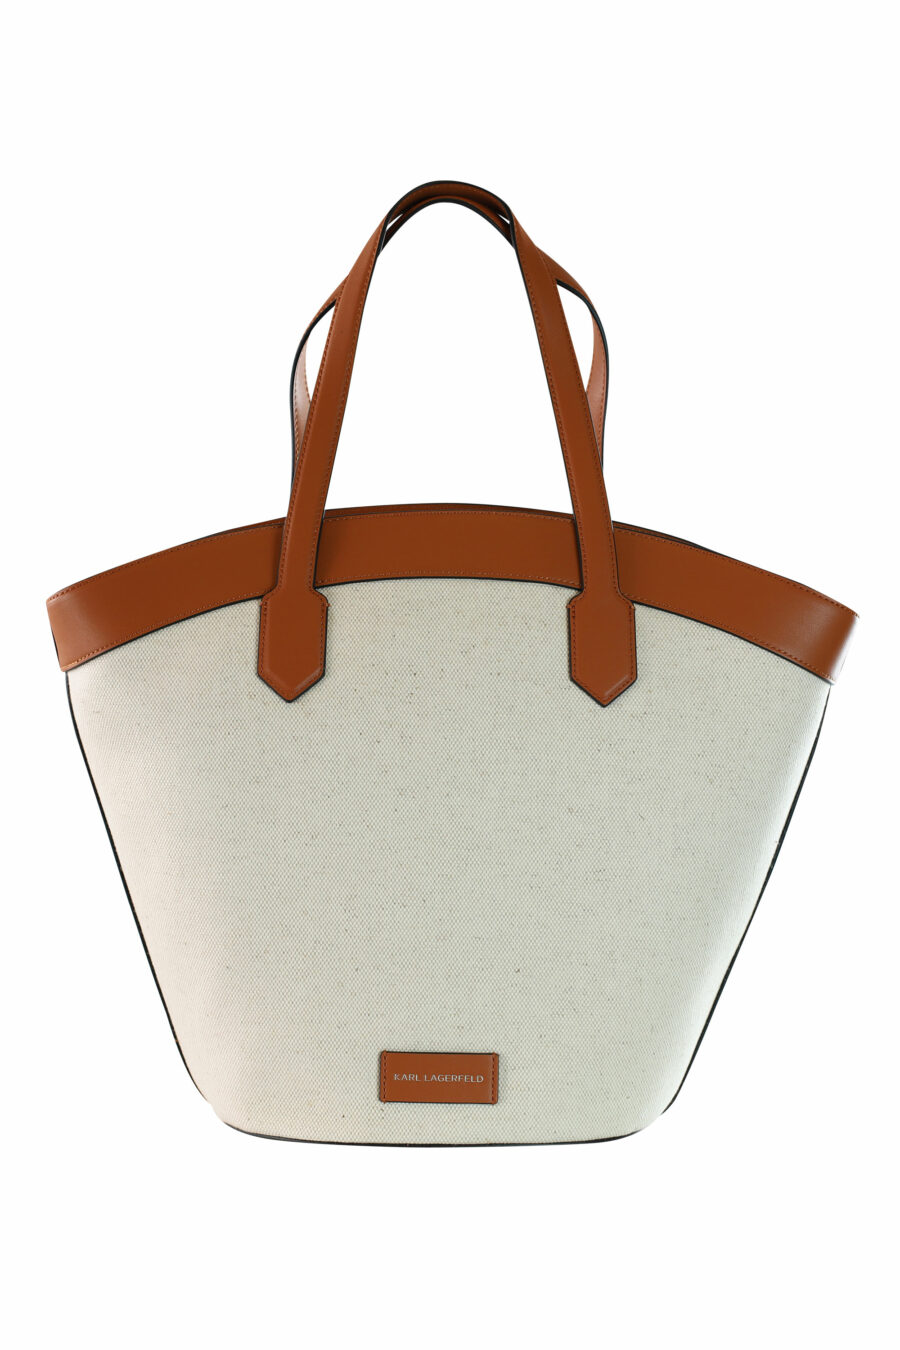 Tote bag white with brown and "k/tulip" logo - 8720744234777 3